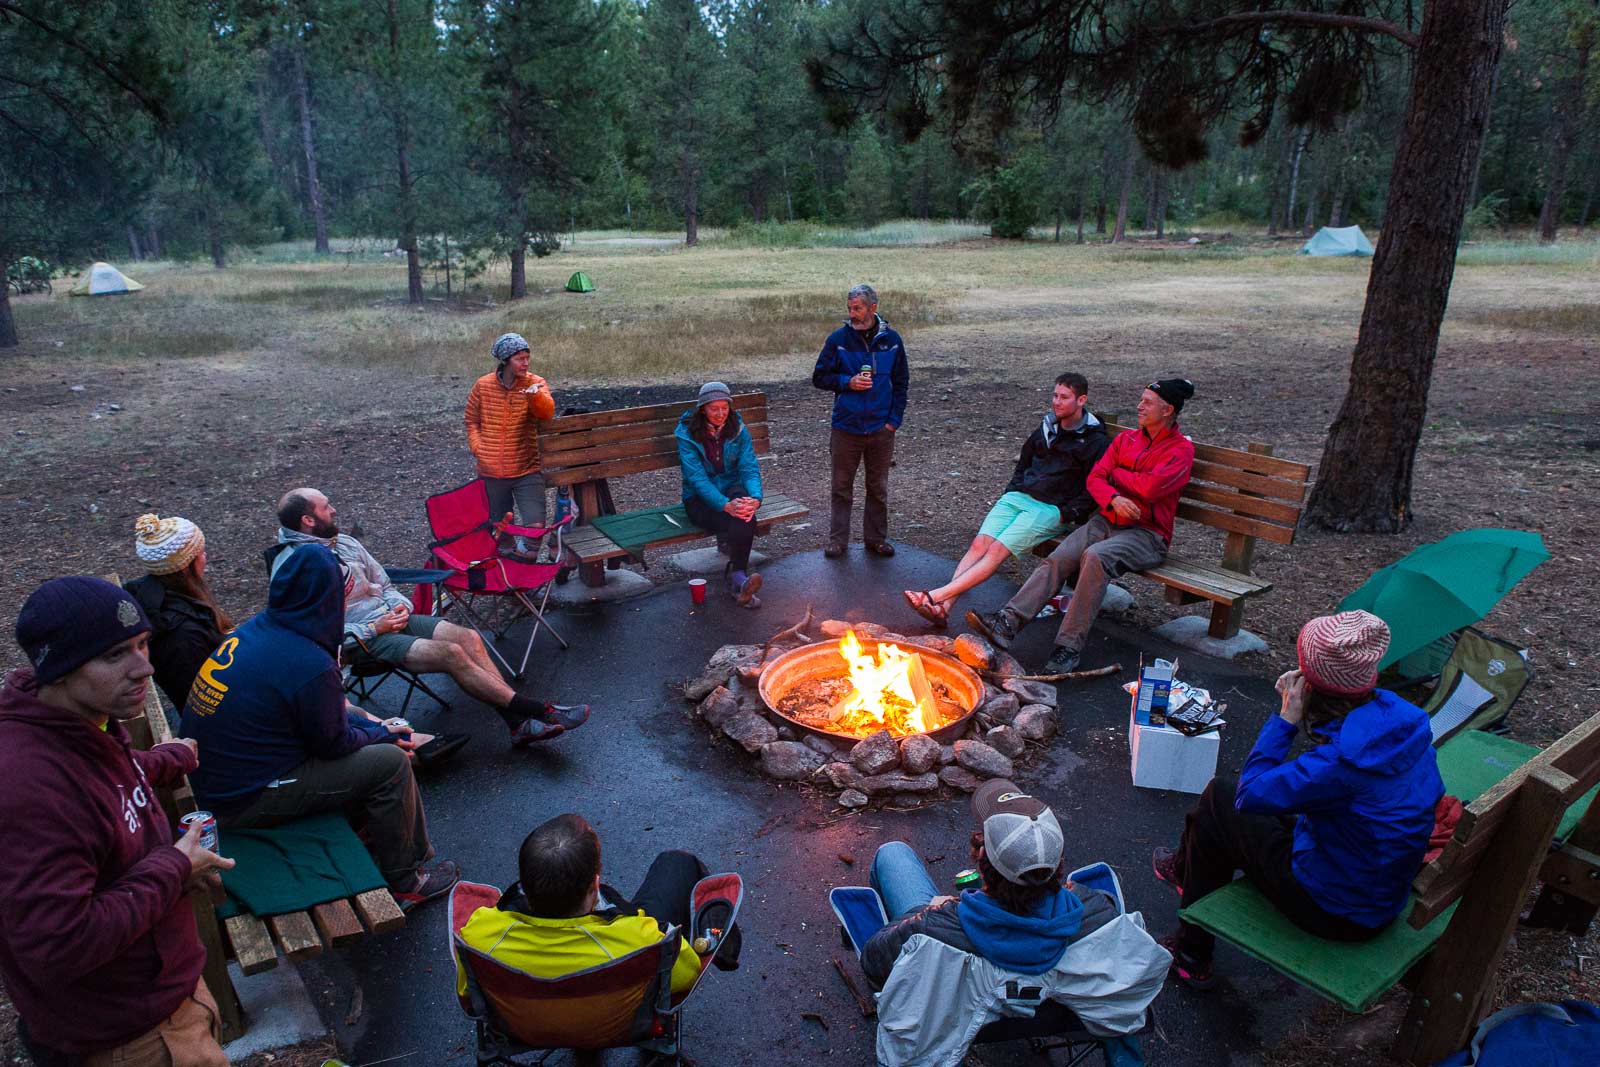 A group of friends gather around the fire after a day on the Bitterroot Trail